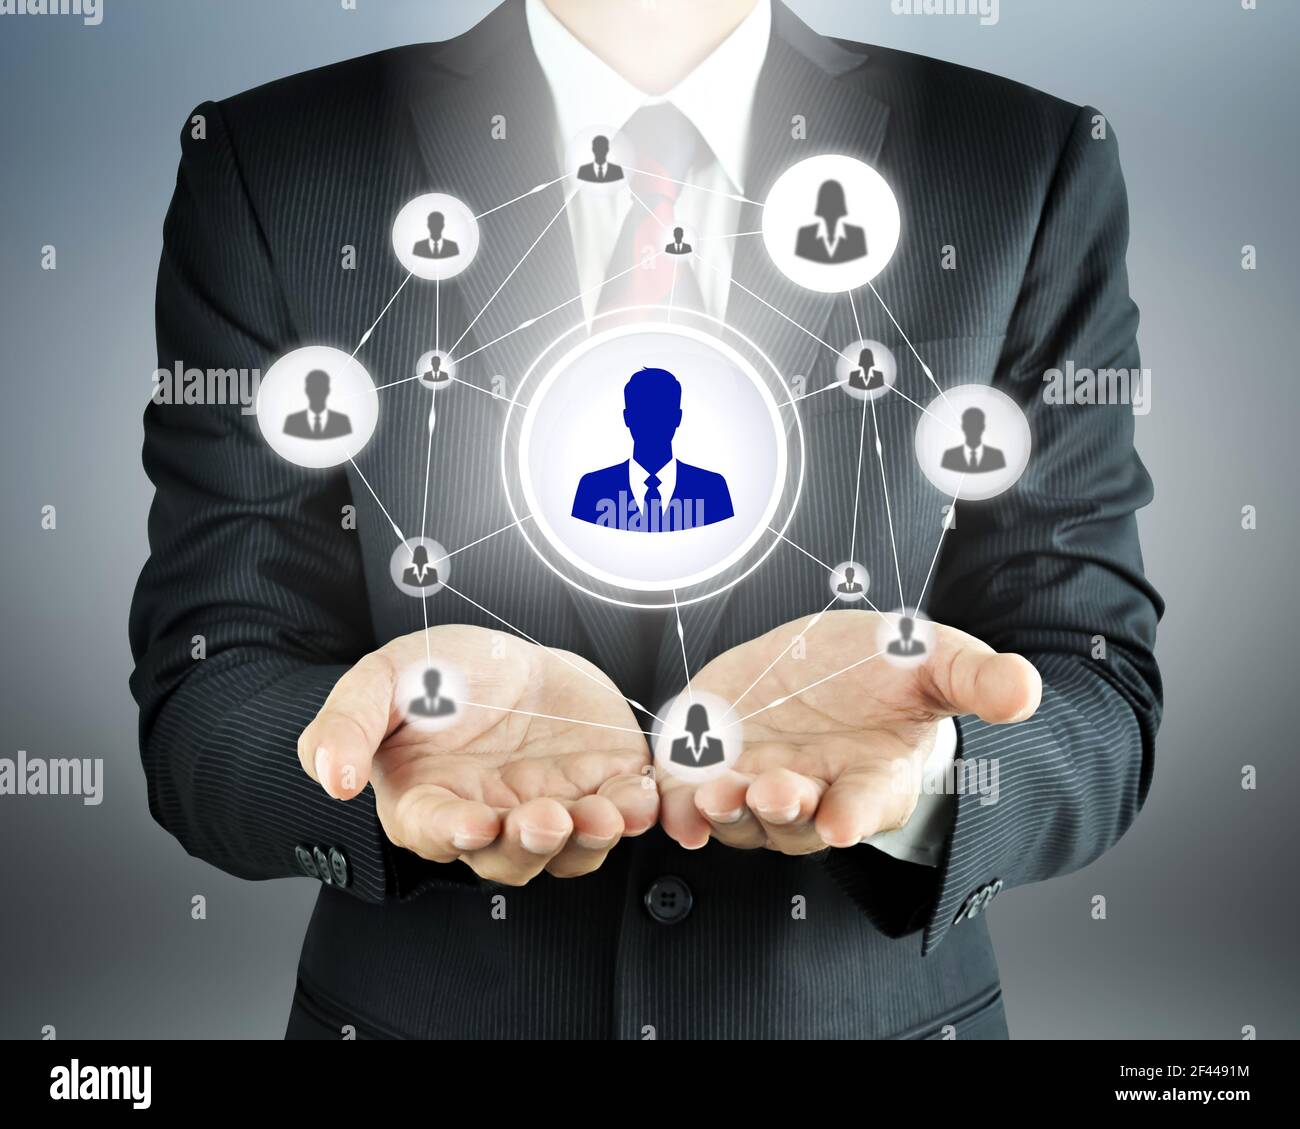 Hands carrying businessman icon network - HR,HRM,MLM, teamwork & leadership concept Stock Photo